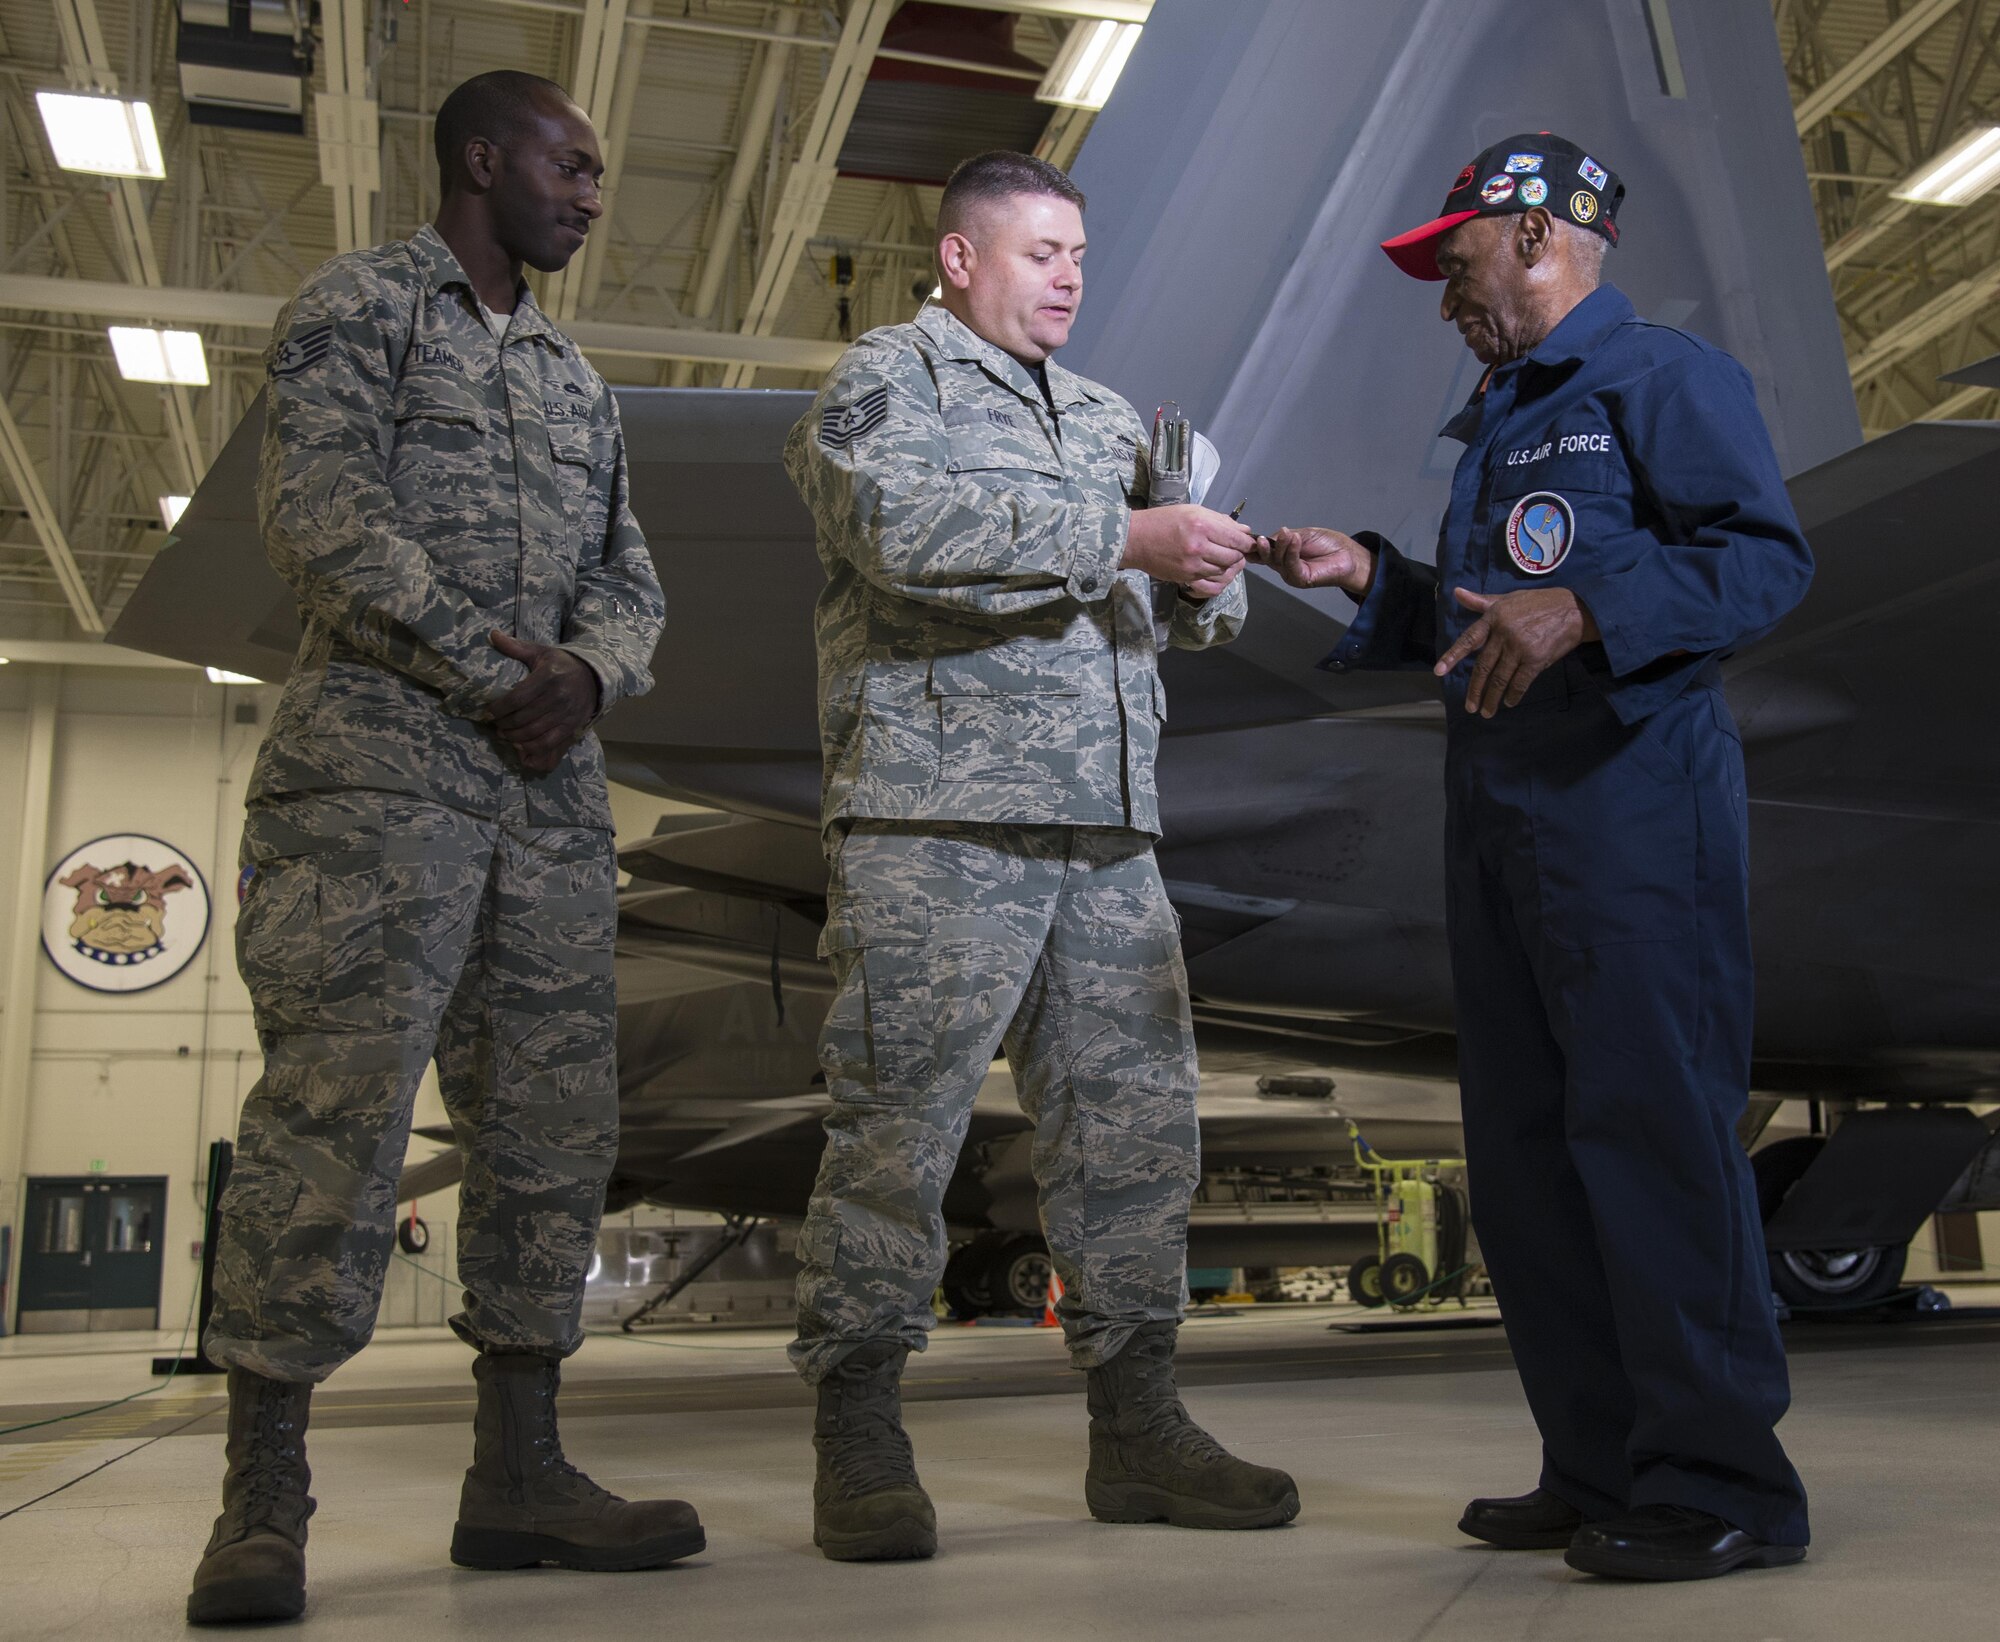 U.S. Air Force Tech. Sgt. Jeremiah Frye (middle), 477th Fighter Group quality assurance inspector, coins Army Air Corps Staff Sgt. Leslie Edwards, the last known living Tuskegee Airman of the 477th Bombardment Group, at Joint Base Elmendorf-Richardson, Alaska, Oct. 14, 2017. Edwards accompanied Frye for his 5,000th quality assurance inspection, a milestone he reached in nine years which typically takes 28 years to accomplish. In 2007, the 477th Bombardment Group became the 477th Fighter Group, bringing with it the legacy of Tuskegee Airmen to Alaska. (U.S. Air Force photo by Senior Airman Curt Beach)